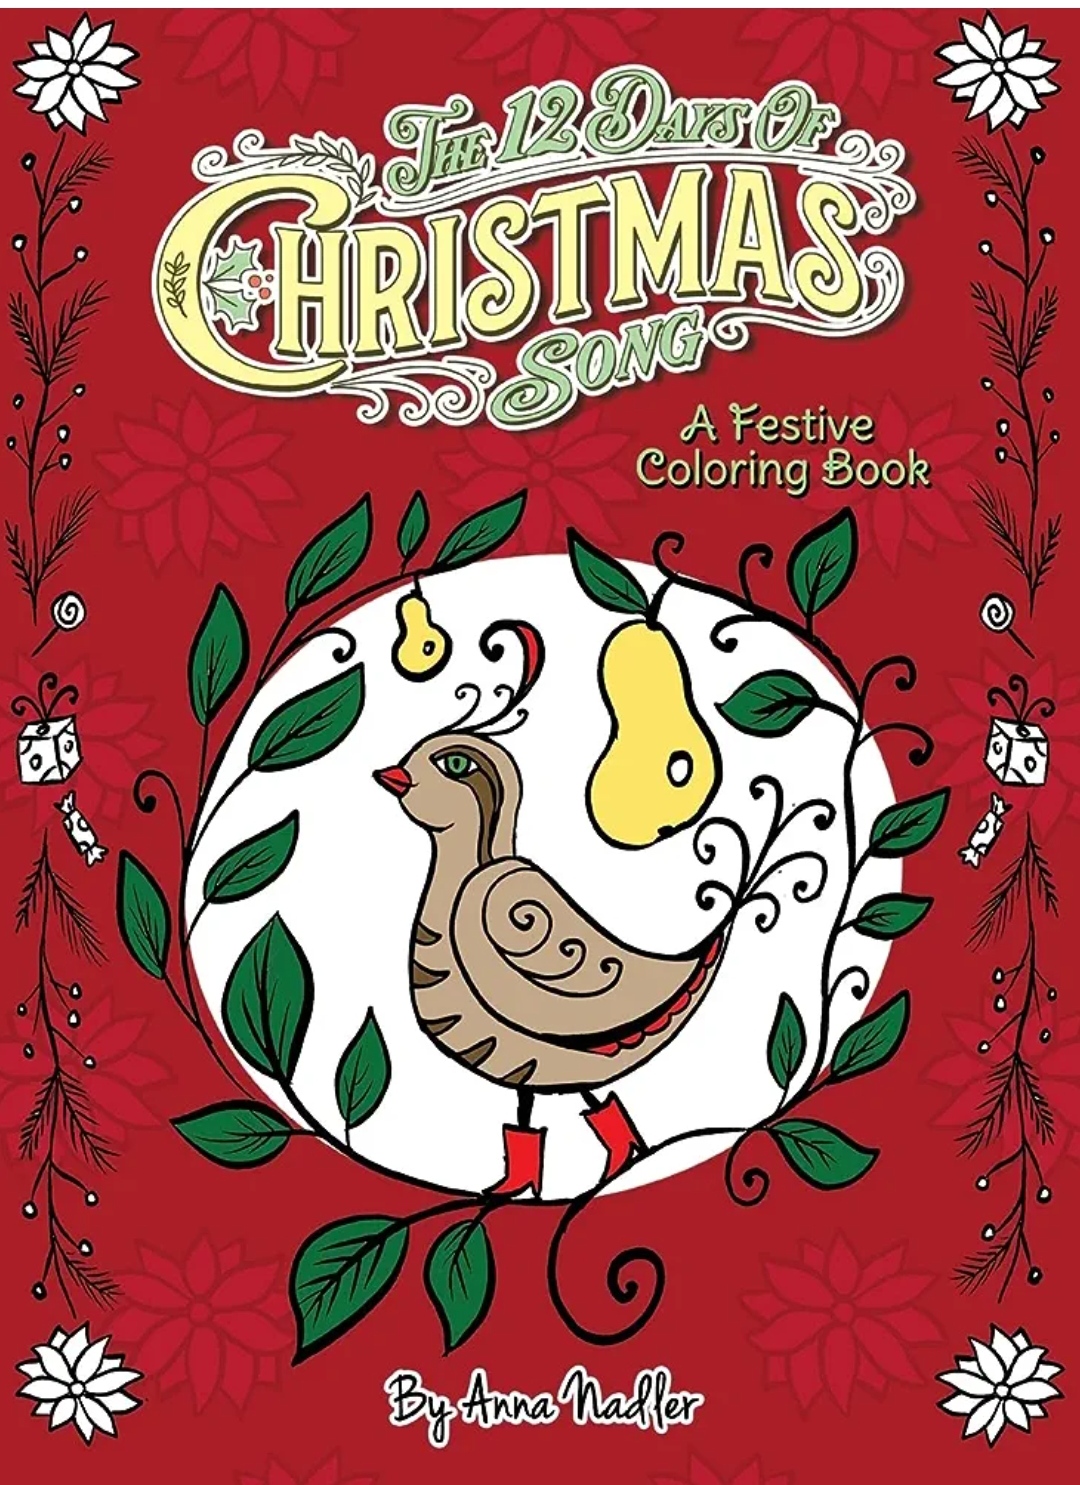 anna nadler the12 days of christmas song a festive coloring book the top 14 funny 12 days of christmas gift ideas